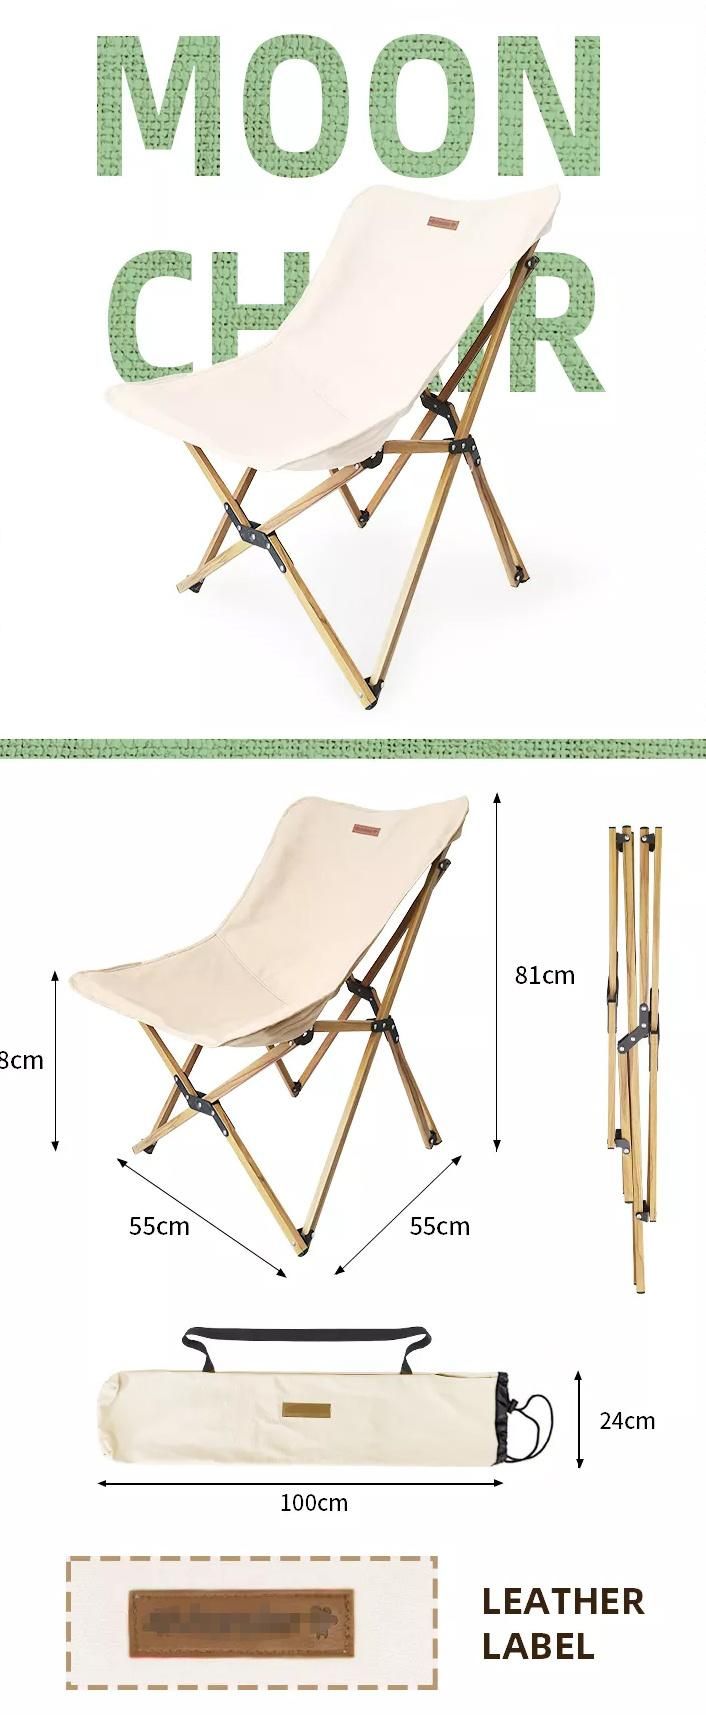 Leather Logo Outdoor Relaxing Portablealuminum Foldable Camping Chair for Beach